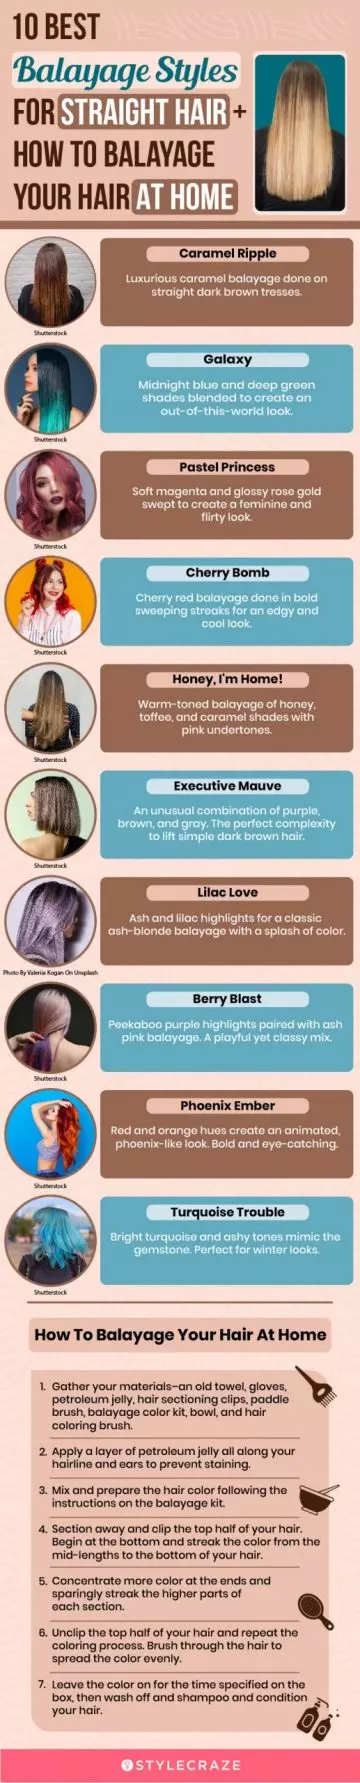 10 best balayage styles for straight hair (infographic)